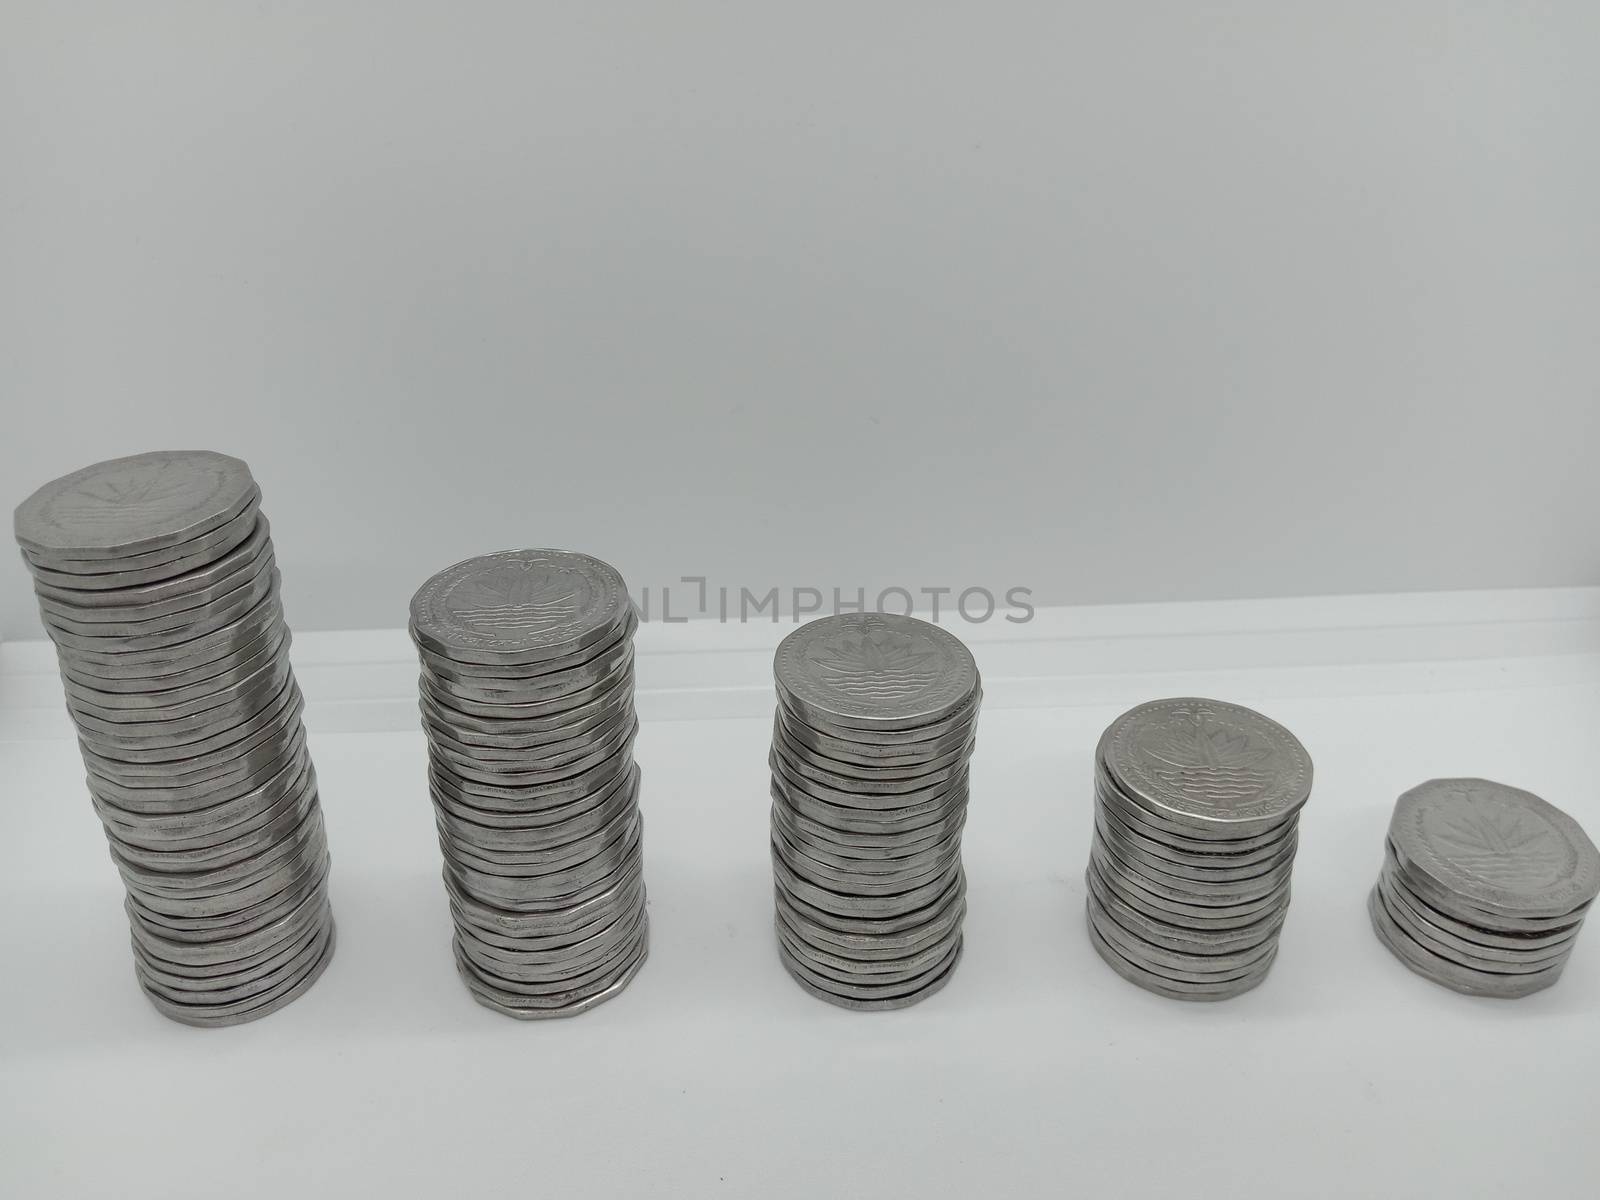 money inflation map with coin white background